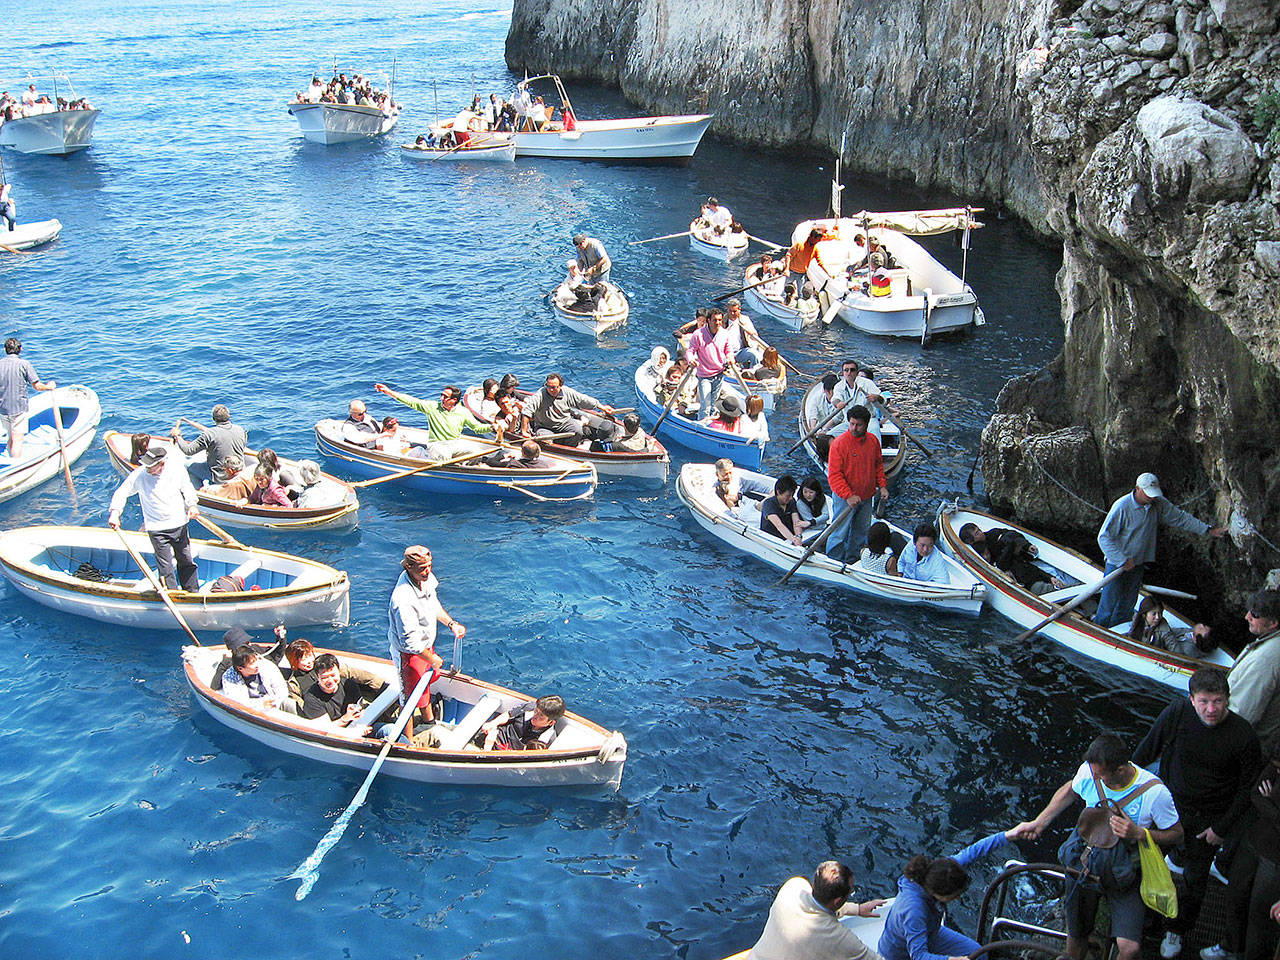 Boats jockey for position as they get ready to enter the Blue Grotto in the island of Capri in southern Italy. (Rick Steves’ Europe)